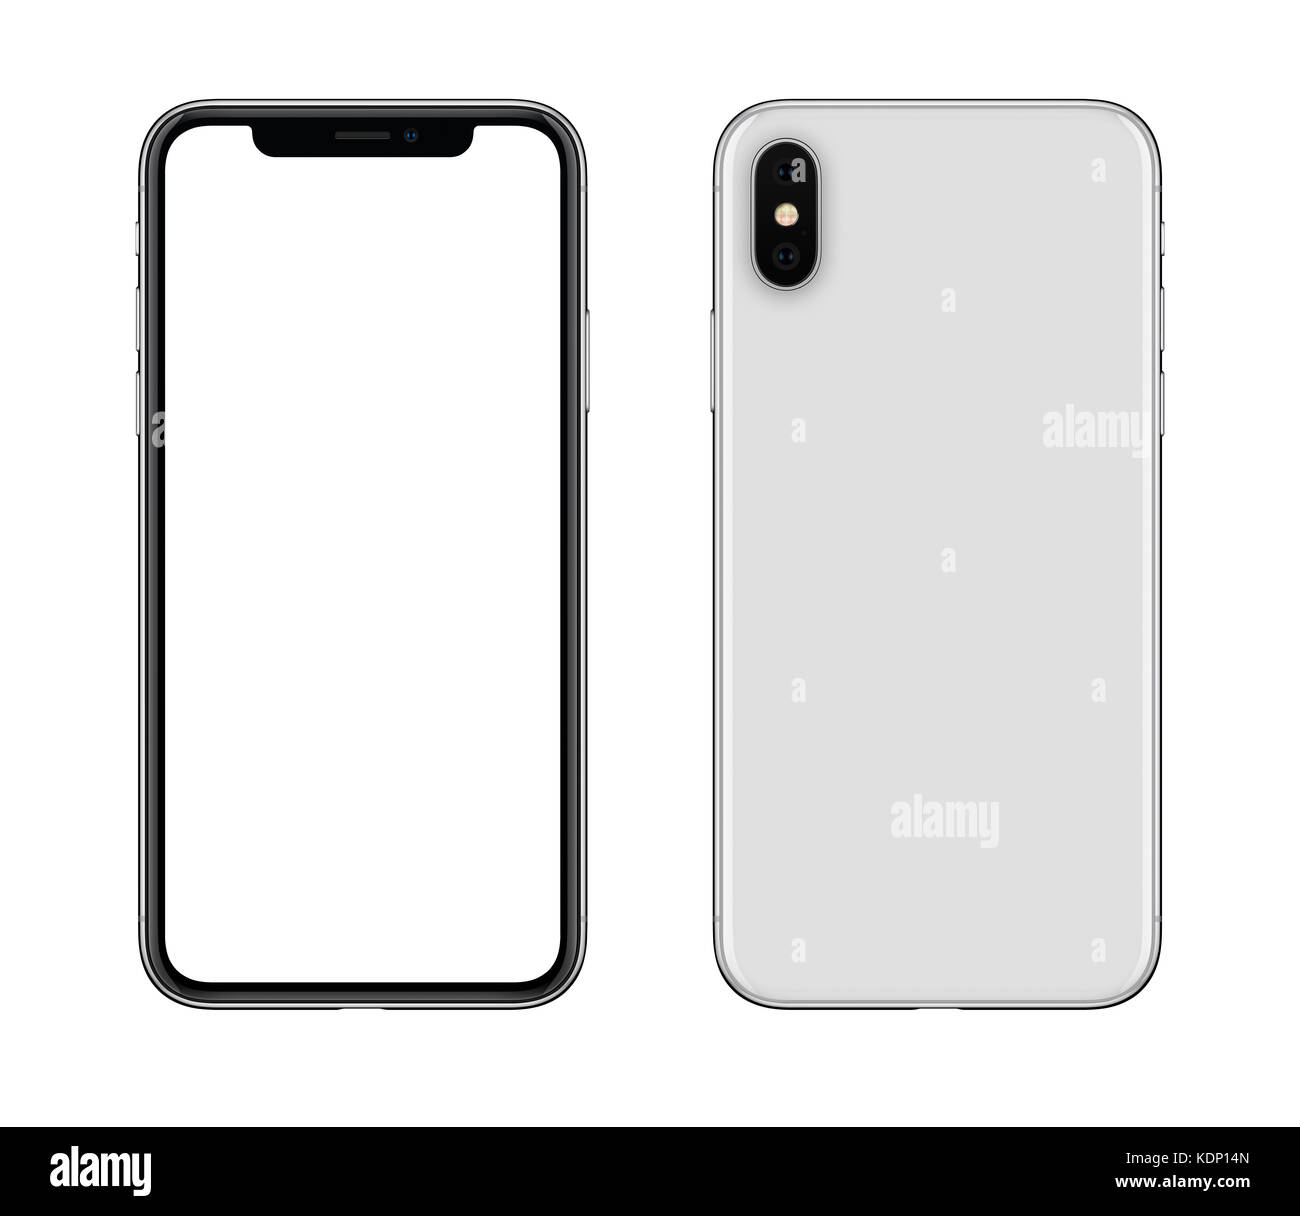 Download New modern white smartphone similar to iPhone X mockup ...